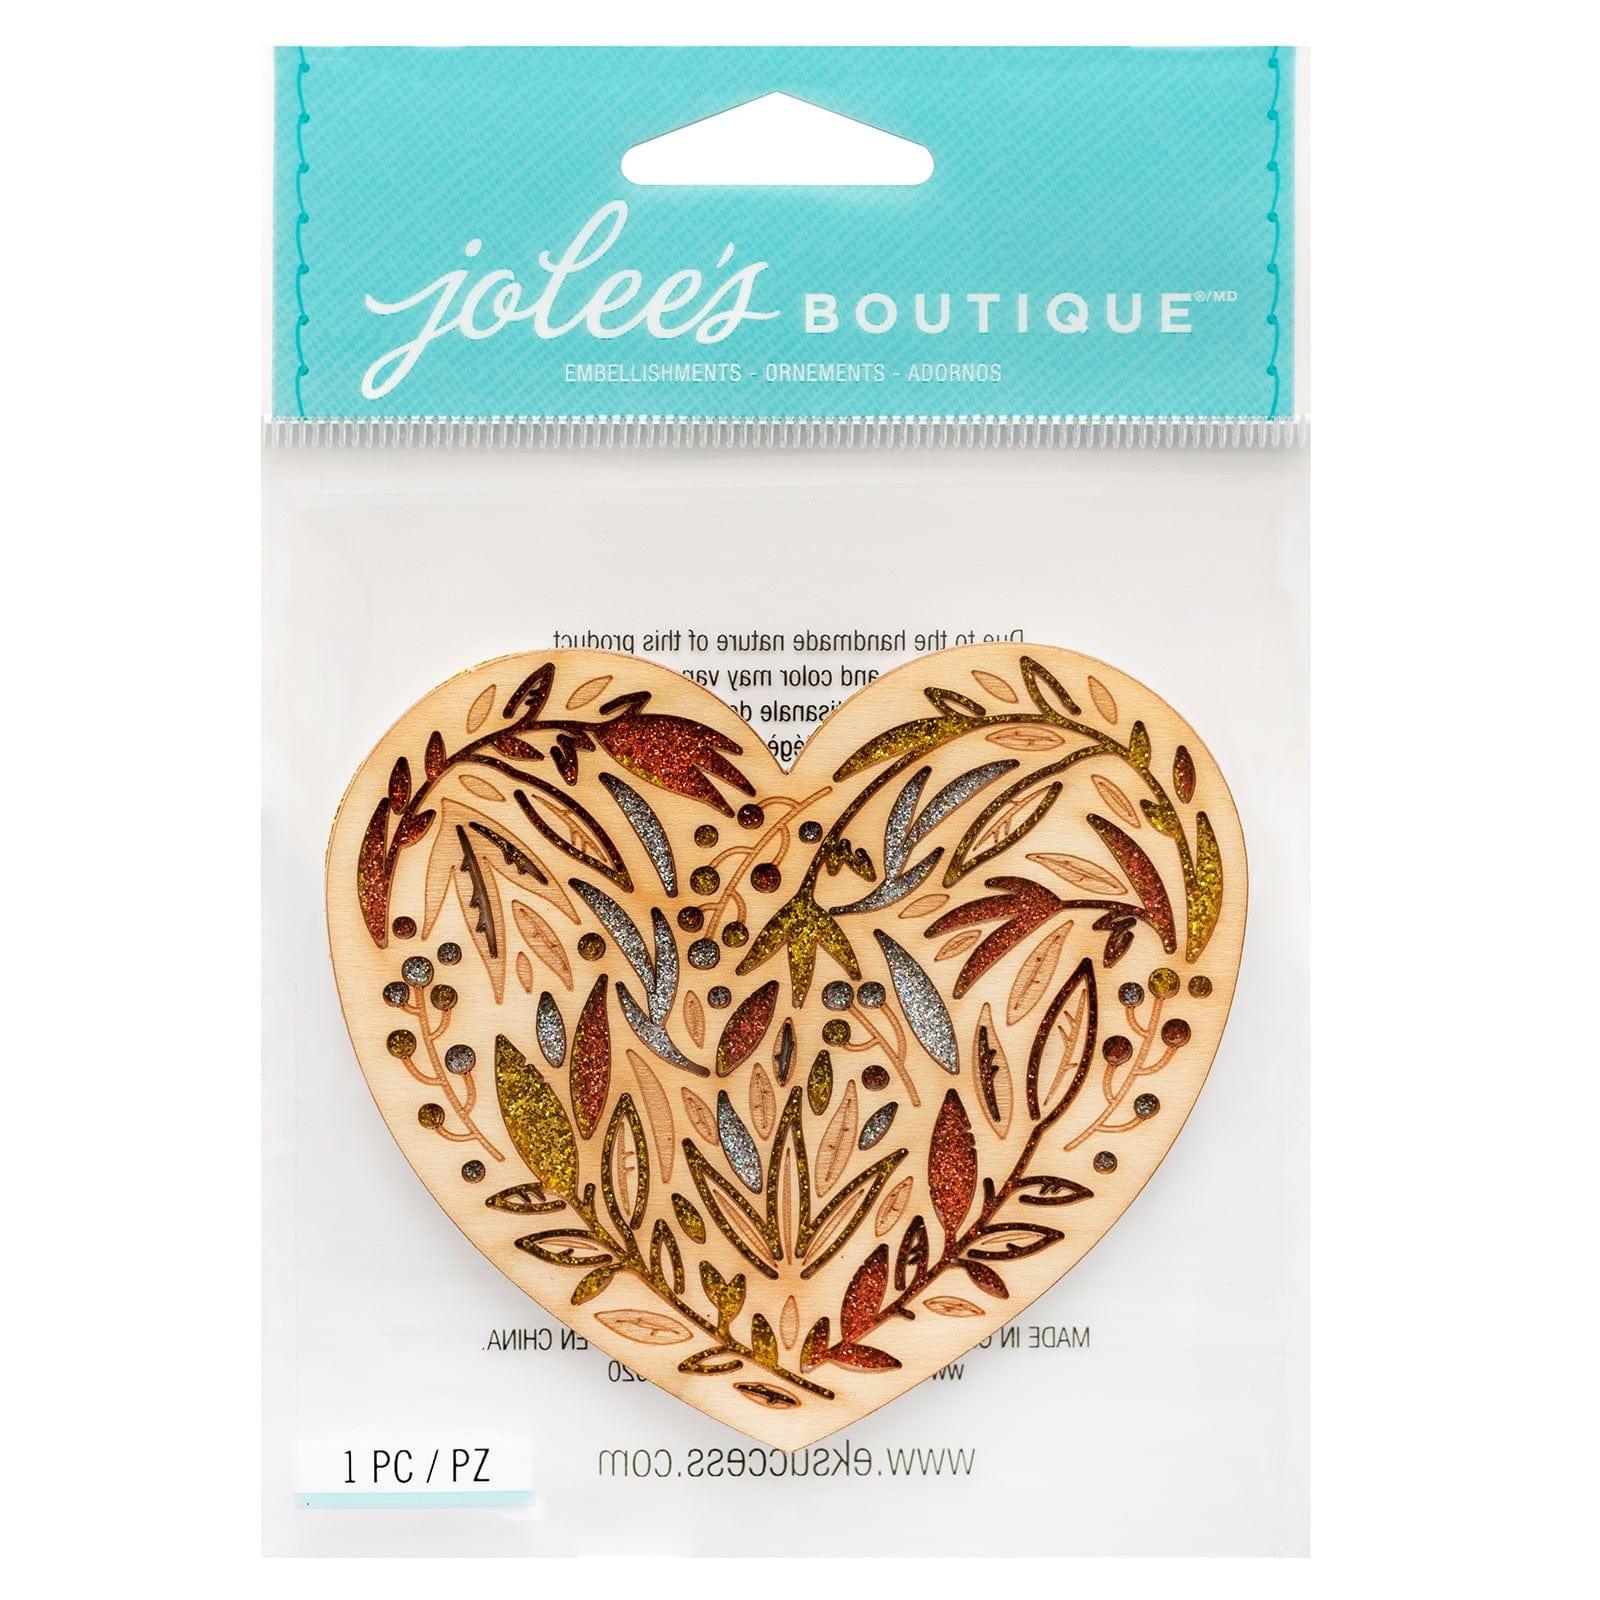 Wood Collection Heart 4 x 4.5 Scrapbook Embellishment by Jolee's Boutique - Scrapbook Supply Companies